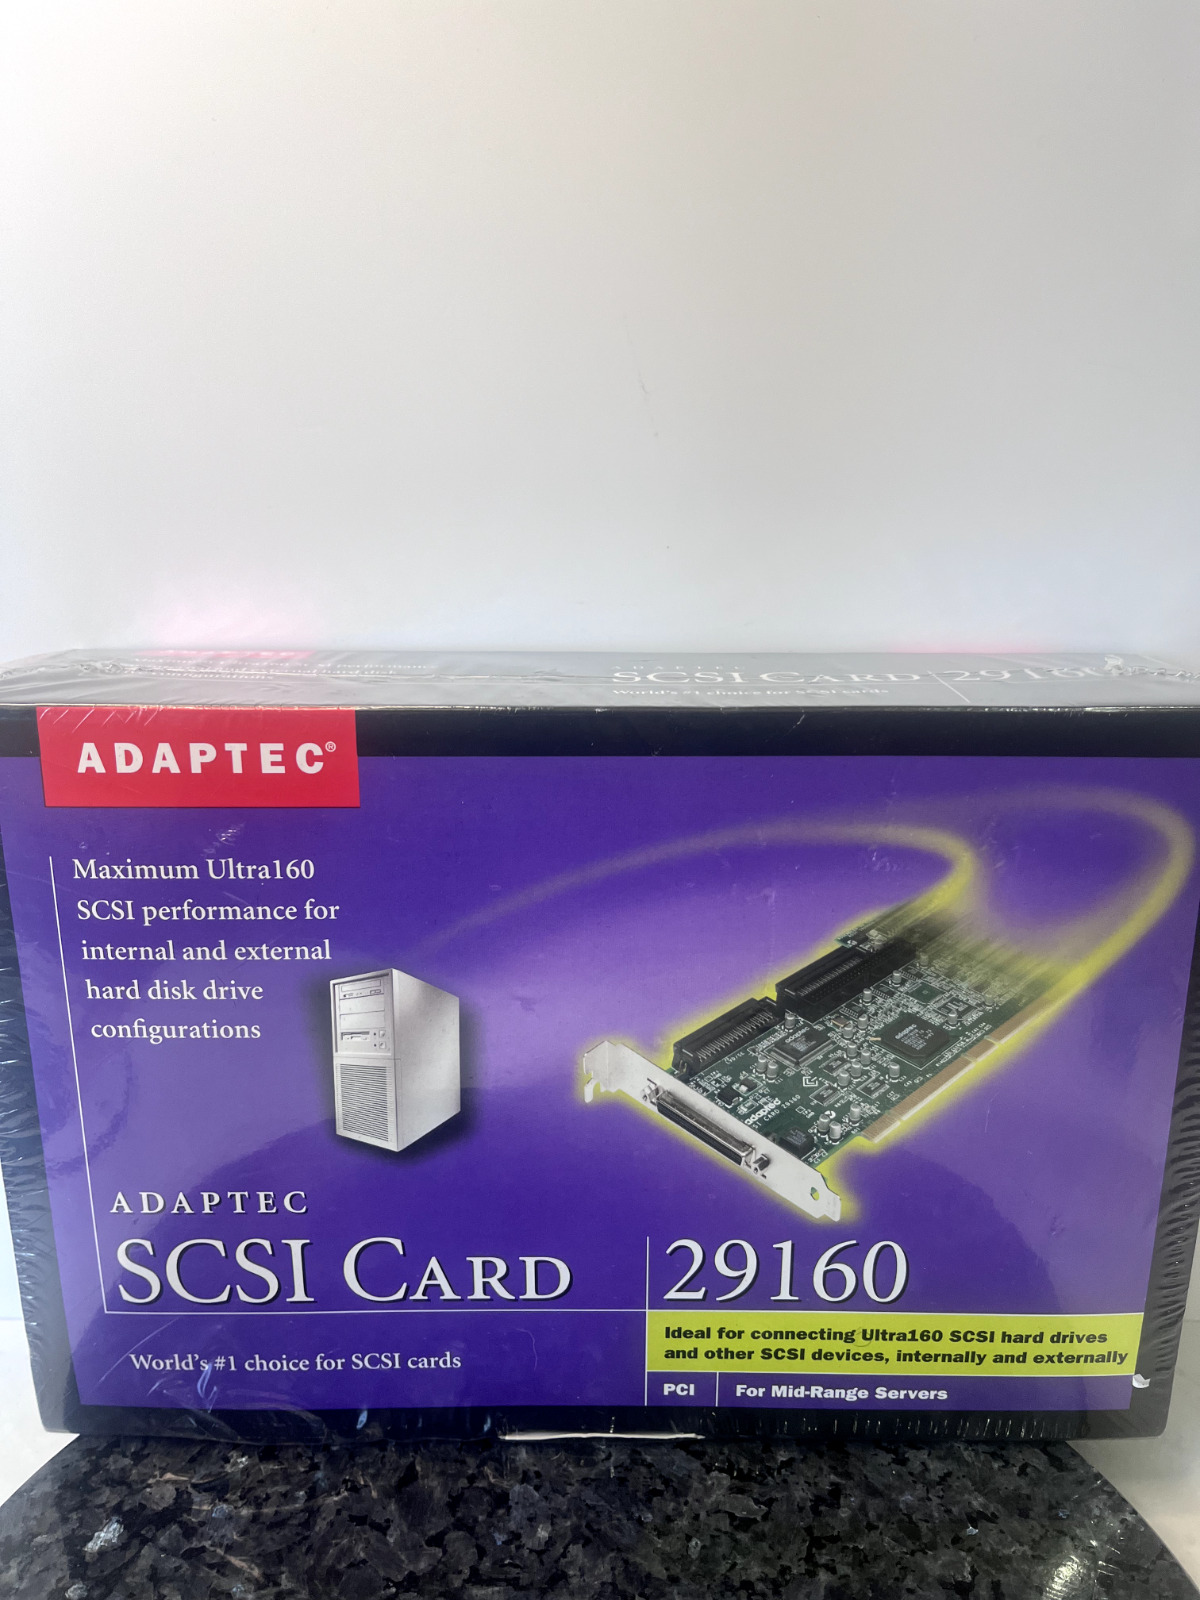 ADAPTEC SCSI CARD#29160 IDEAL 4 ULTRA160 AND OTHER SCSI DEVICES-MID RANGE SERVER